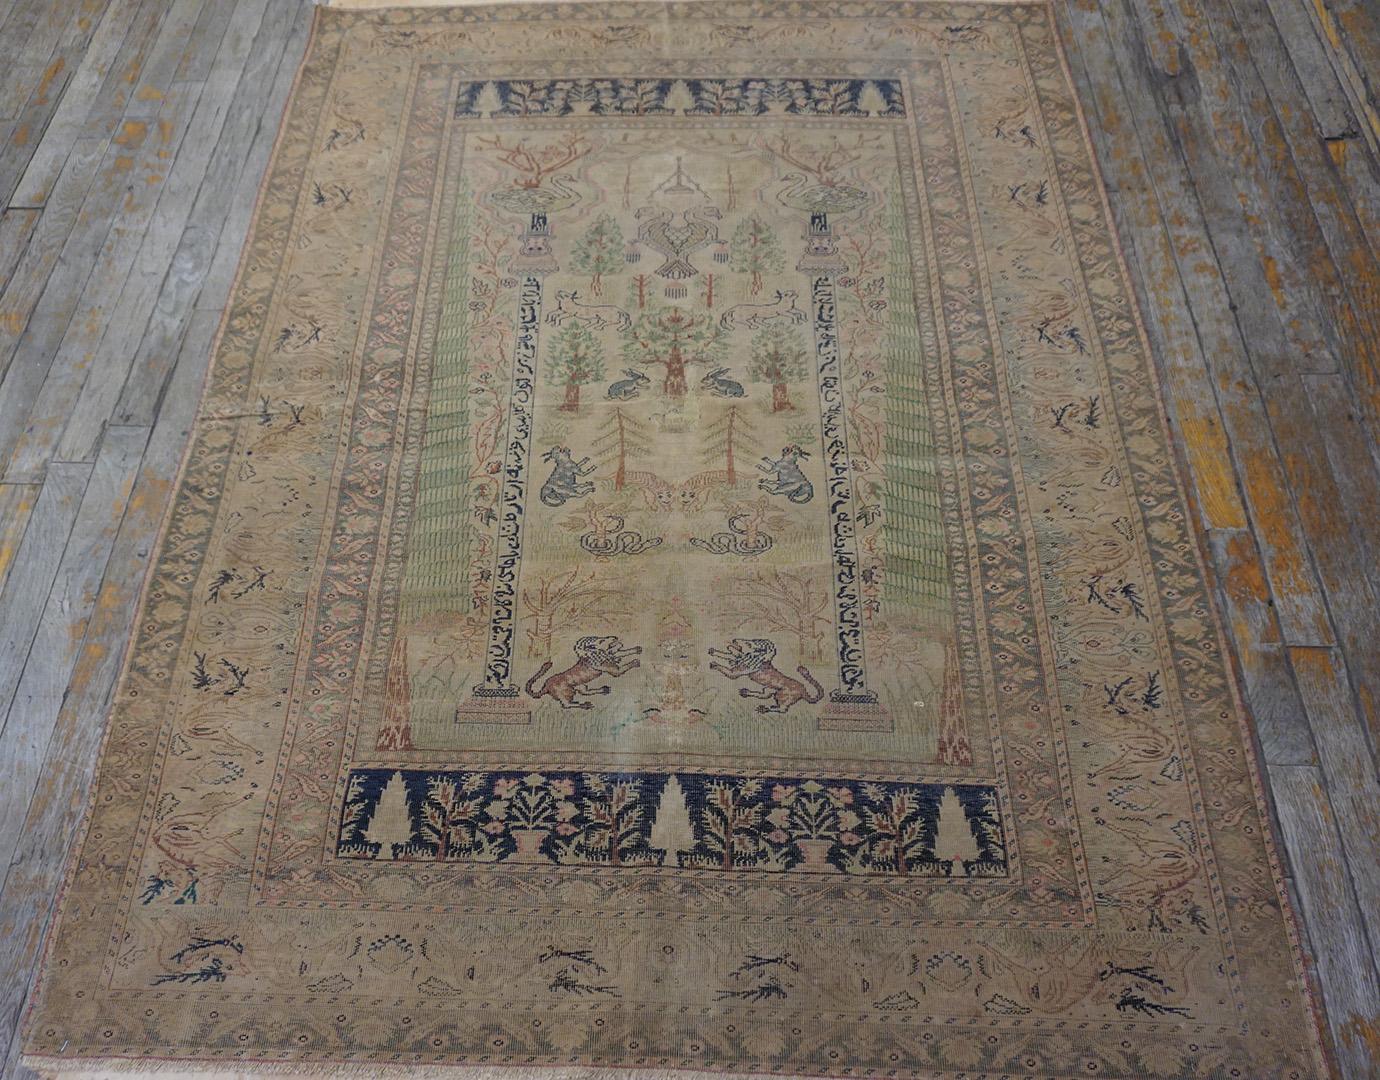 Hand-Knotted Early 20th Century Turkish Panderma Prayer Rug4' 3